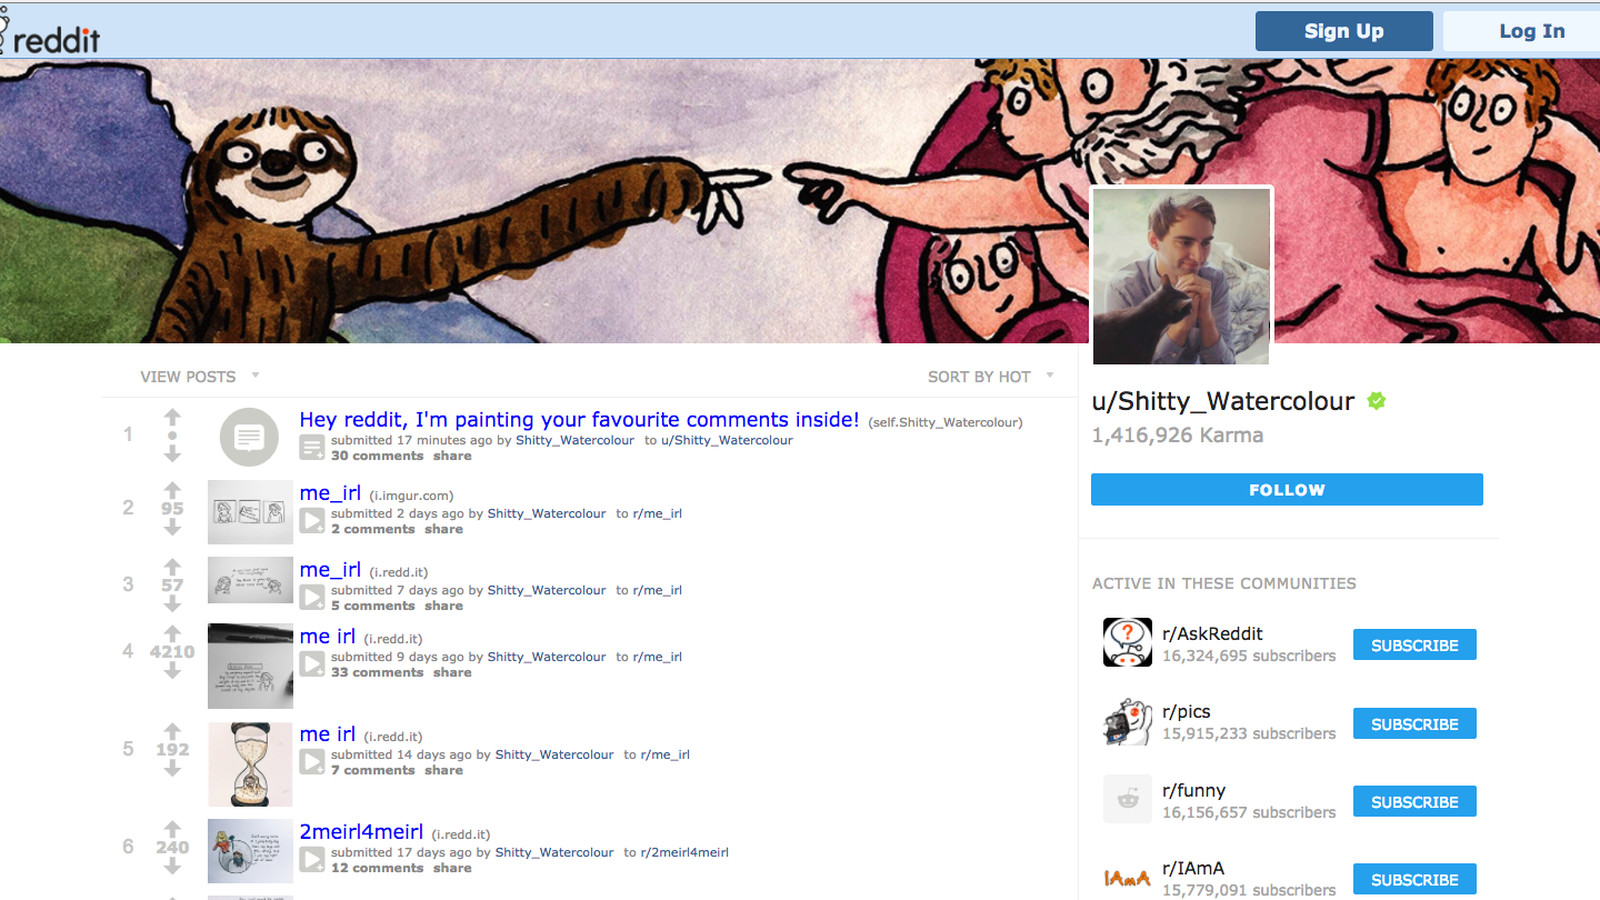 Reddit’s new profile pages could fundamentally transform